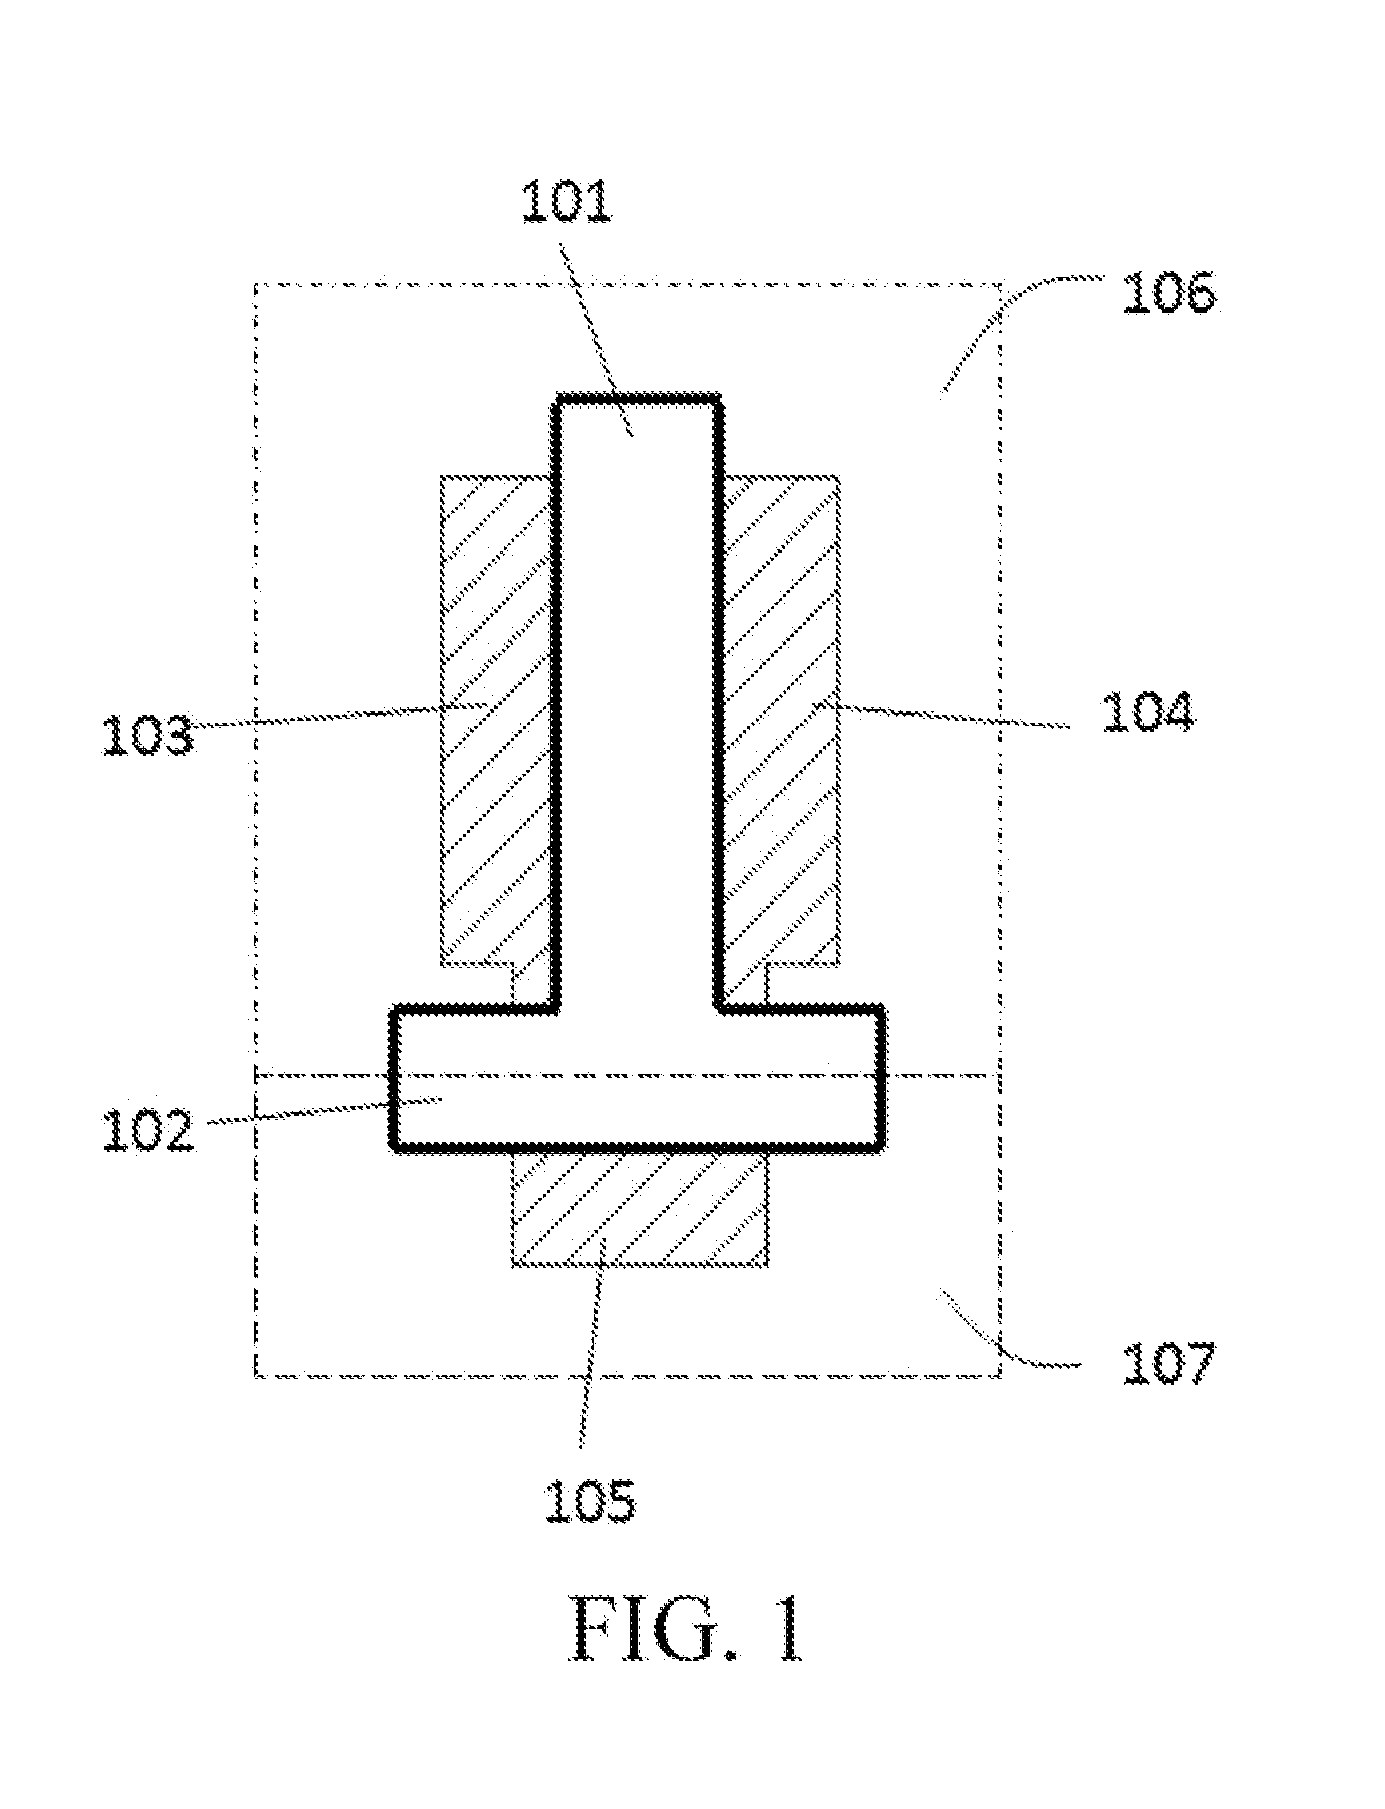 Equivalent Electrical Model of SOI FET of Body Leading-Out Structure, and Modeling Method Thereof